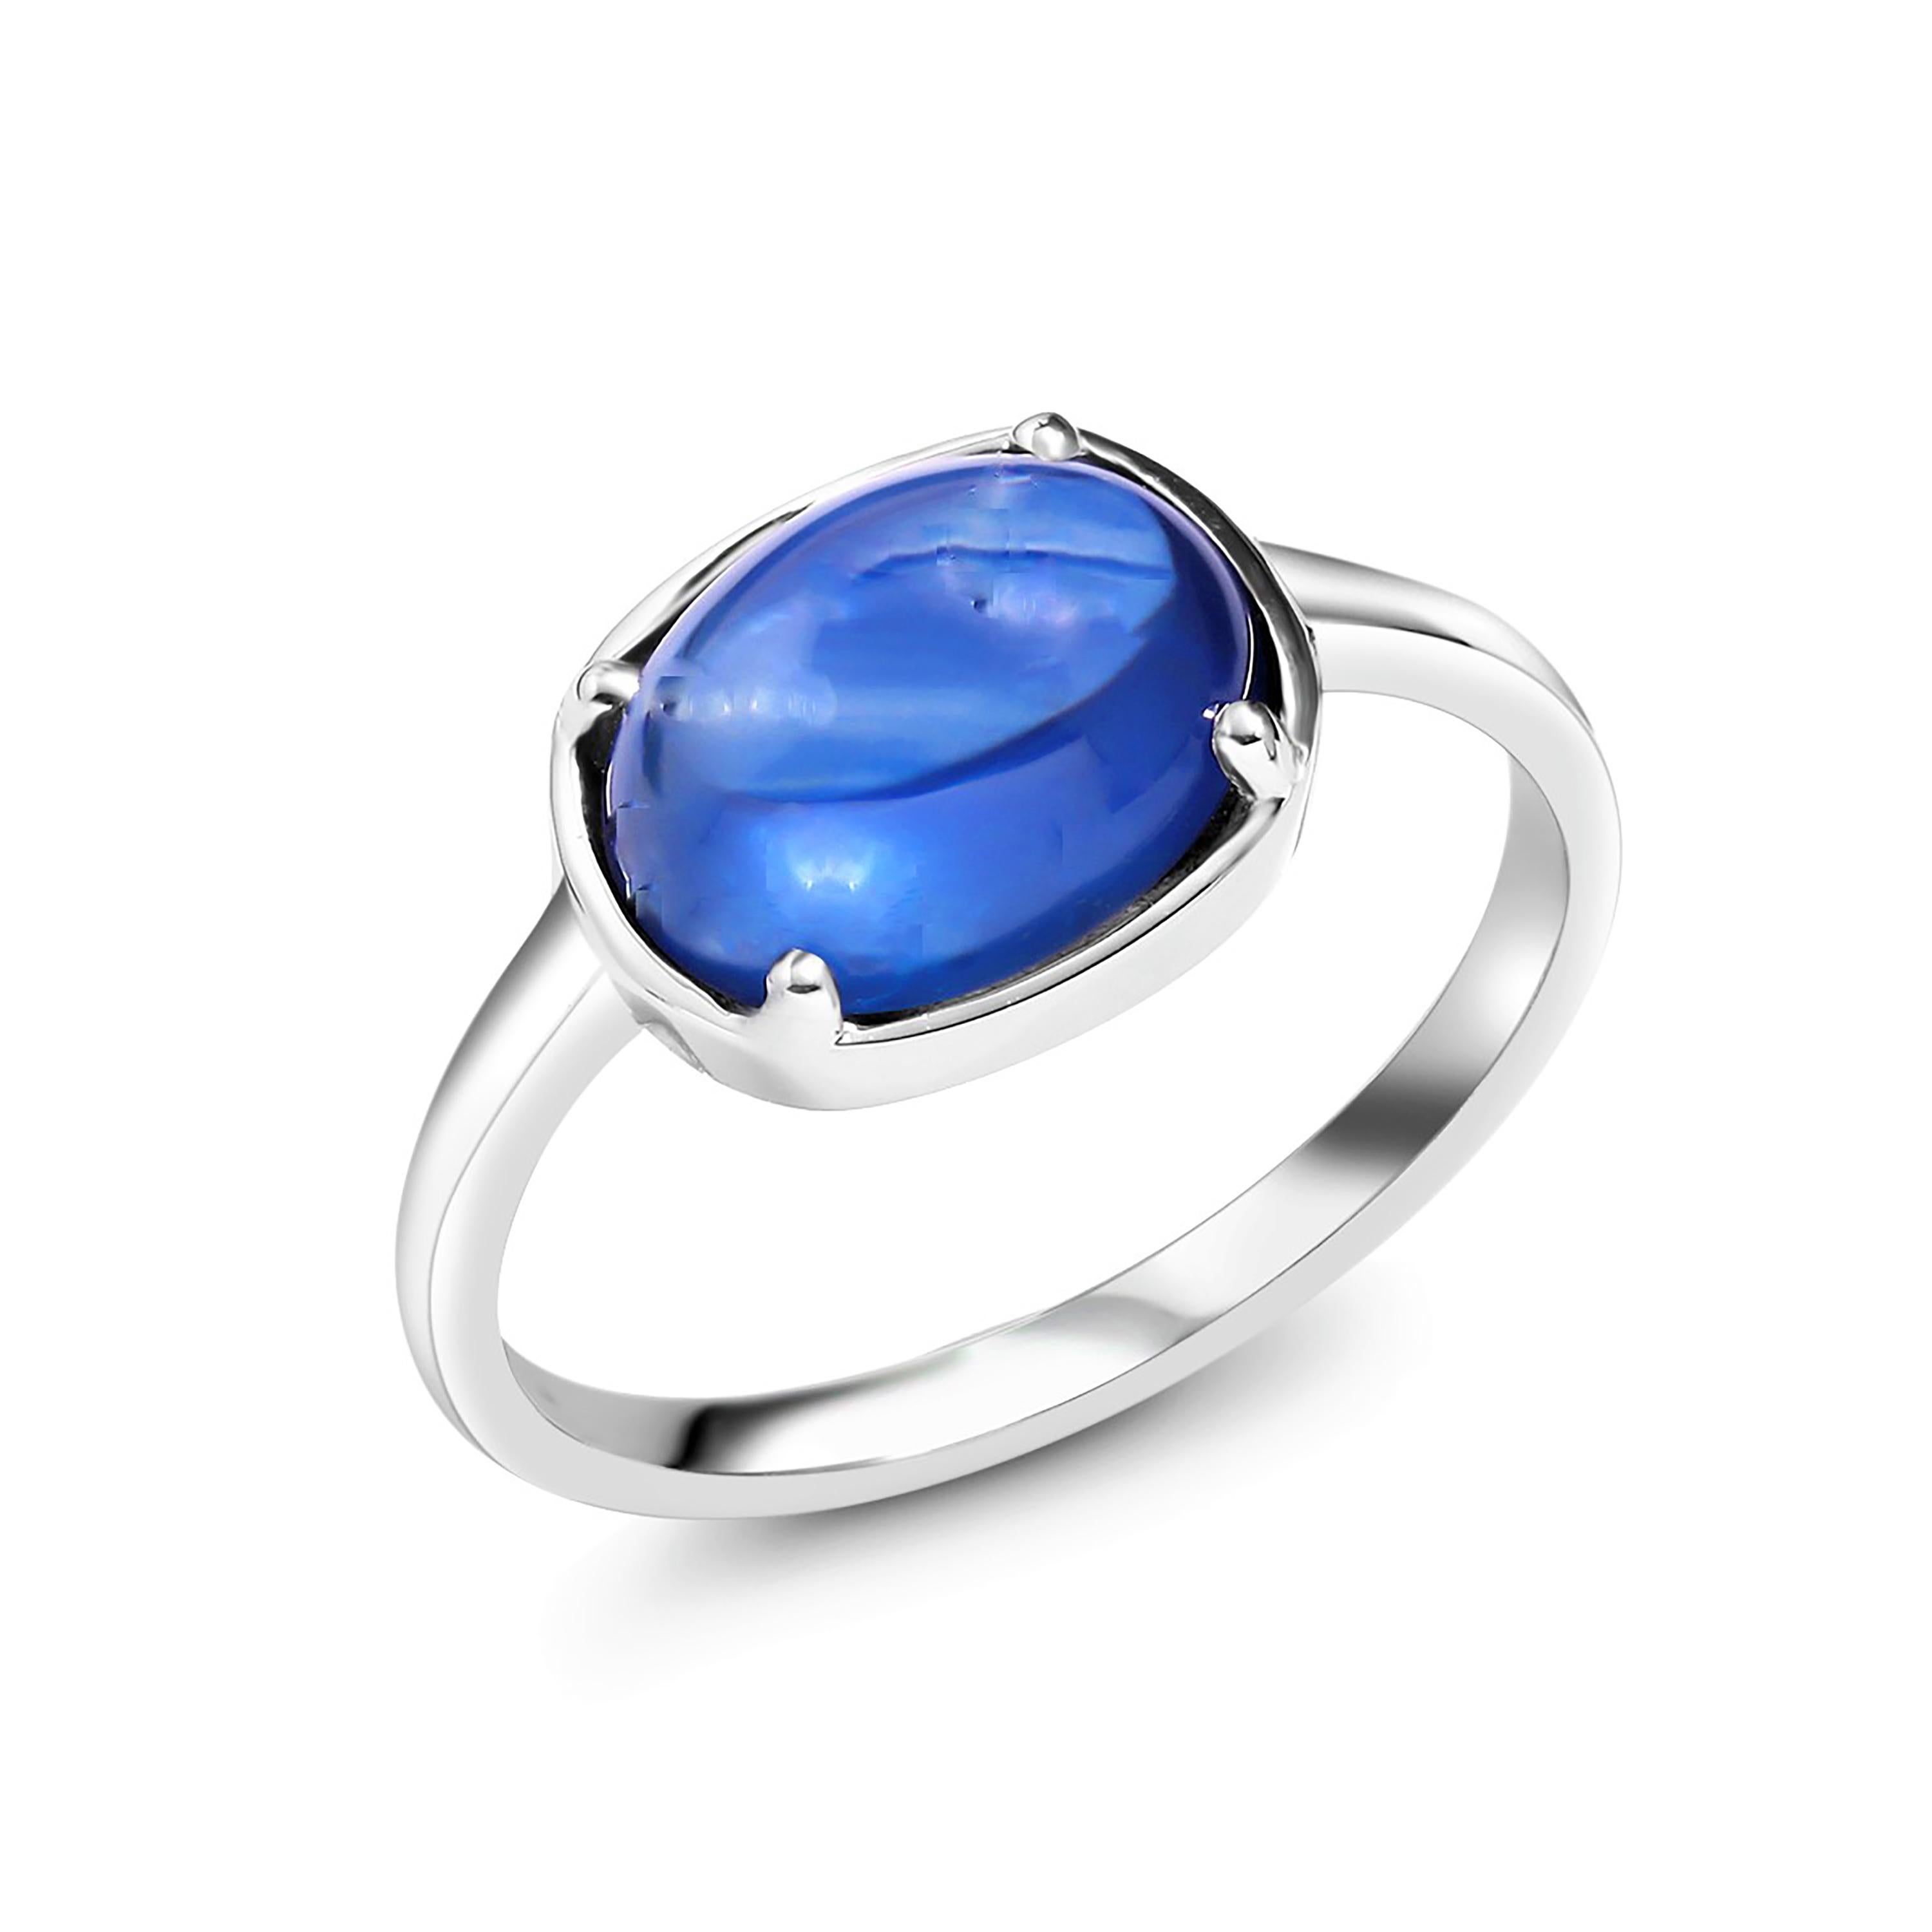 Eighteen karats white gold ring
Ceylon cabochon sapphire weighing  4.25 carat  
Sapphire measuring 10x8 millimeter                                                                      
Ring size 6 In Stock
The ring can be resized 
New Ring
Handmade